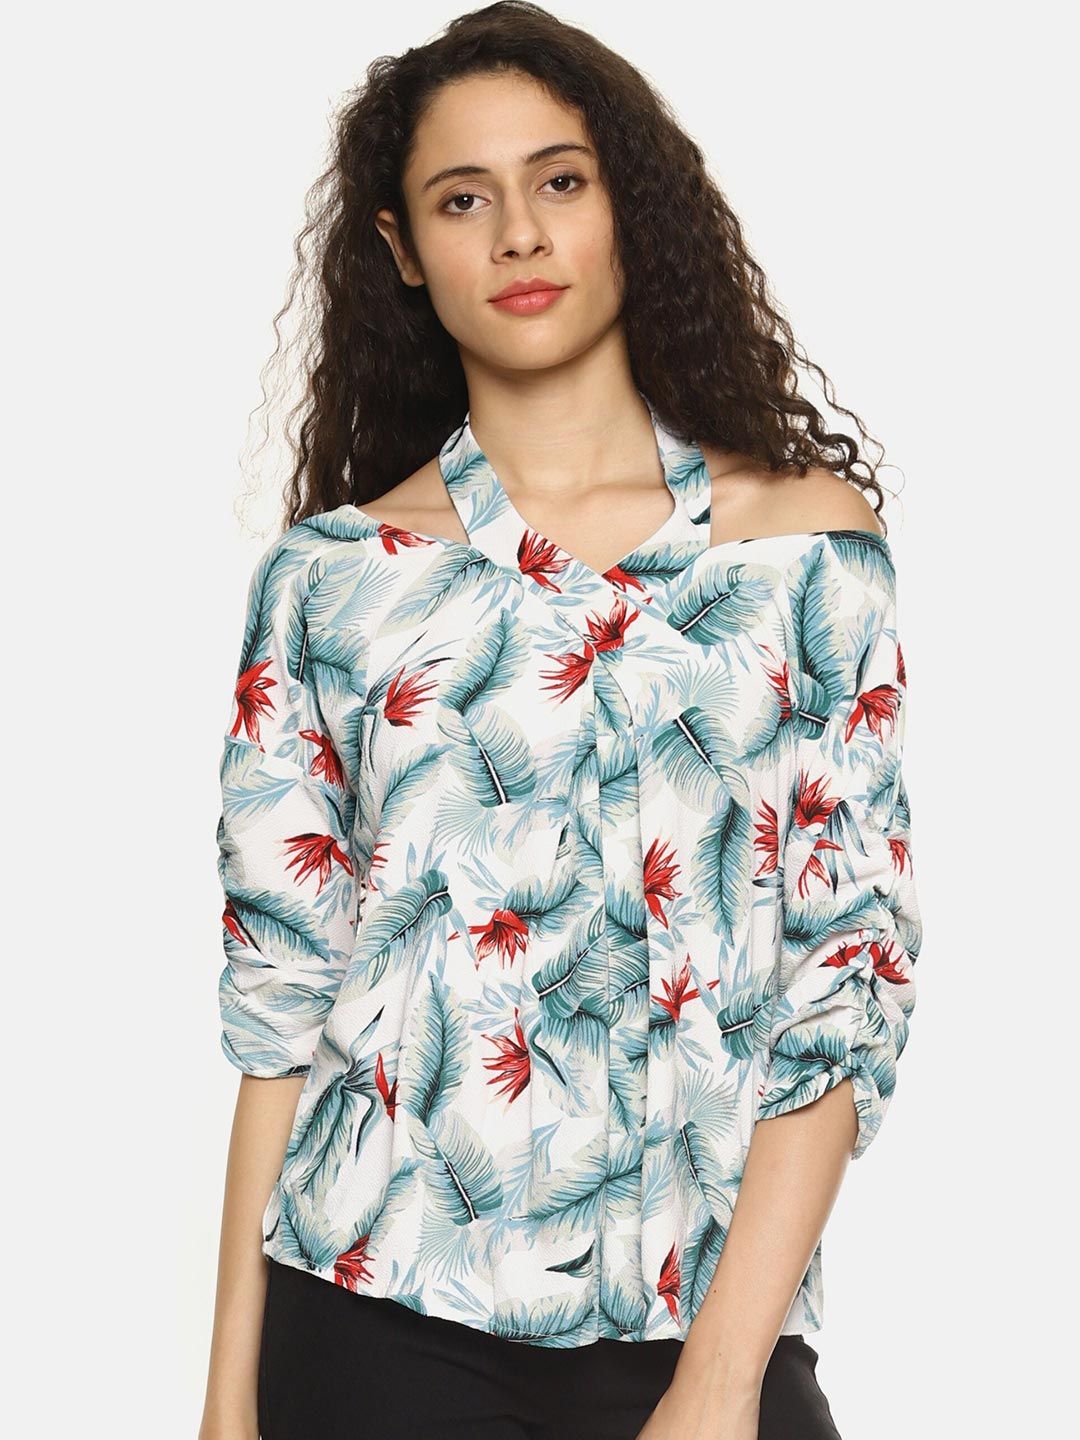 SAHORA Off Women Floral Print Halter Neck Tropical Crepe Shirt Style Top Price in India